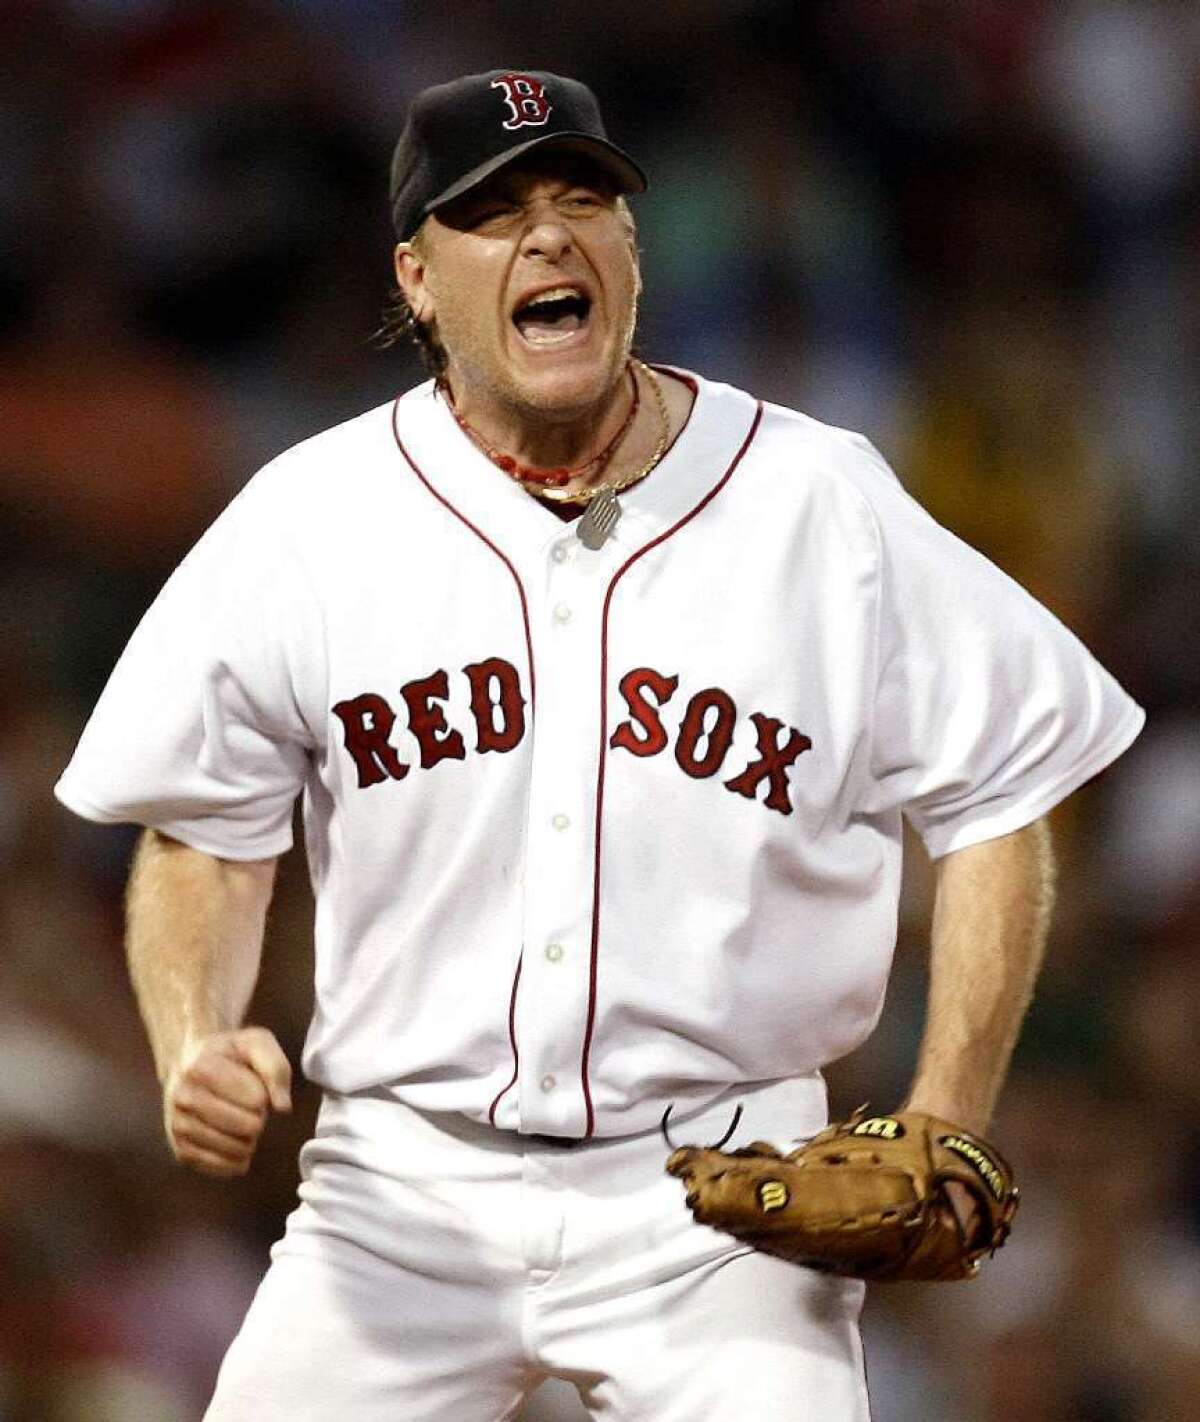 Curt Schilling says he was encouraged to use PEDs with Red Sox